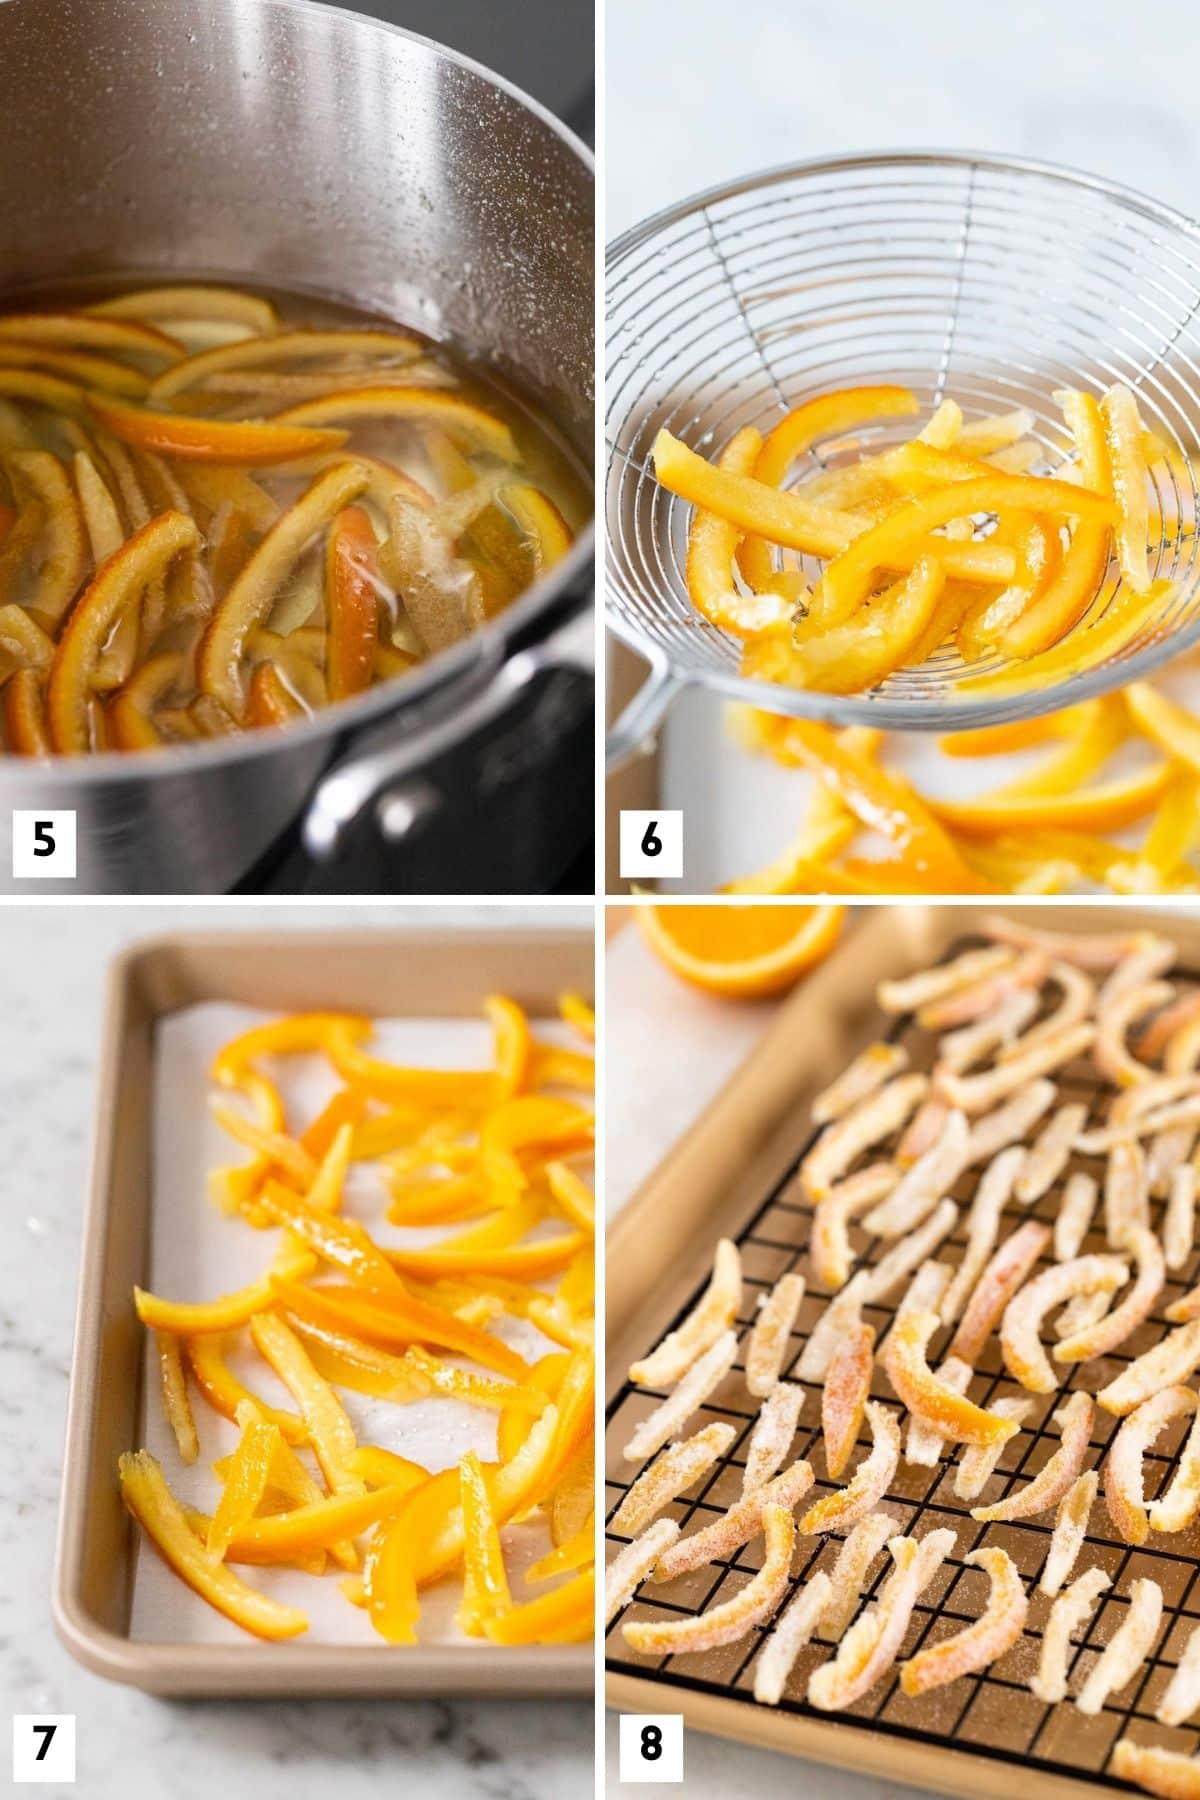 Steps for making candied peel.